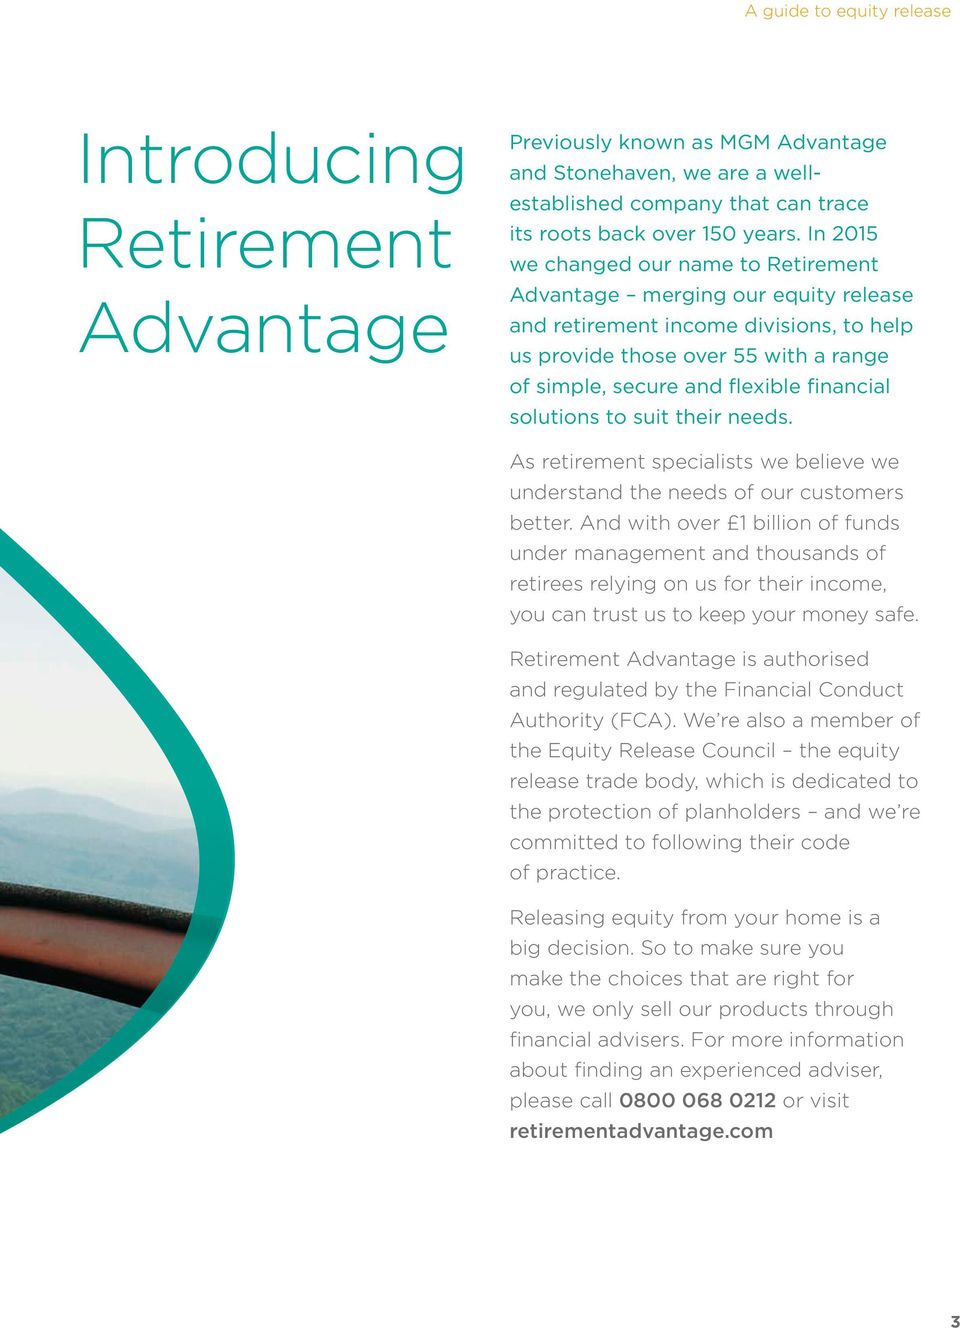 solutions to suit their needs. As retirement specialists we believe we understand the needs of our customers better.